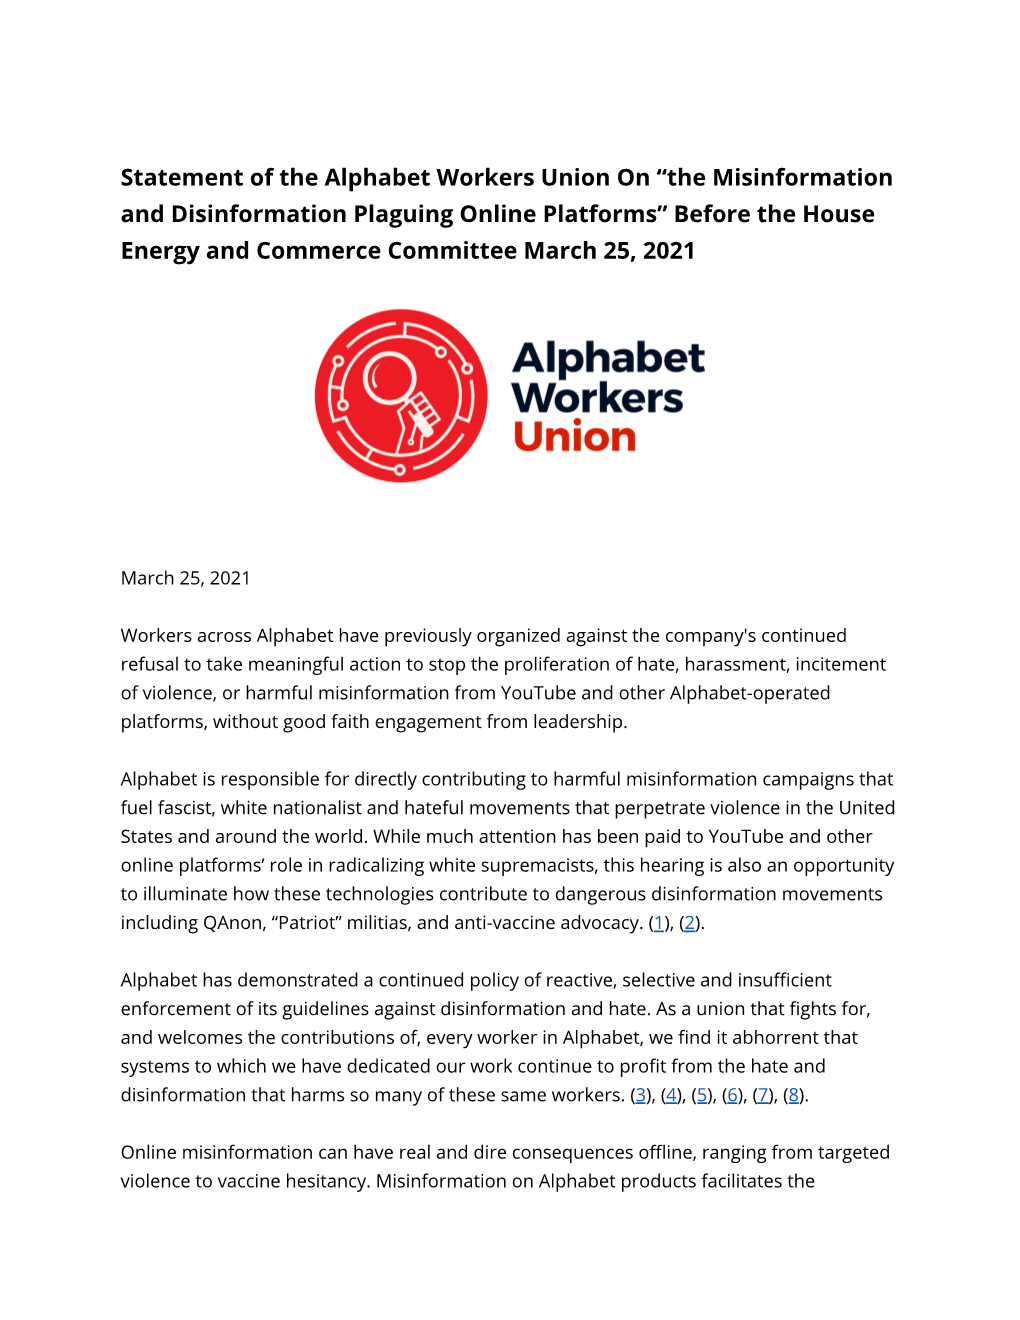 Statement of the Alphabet Workers Union on “The Misinformation And